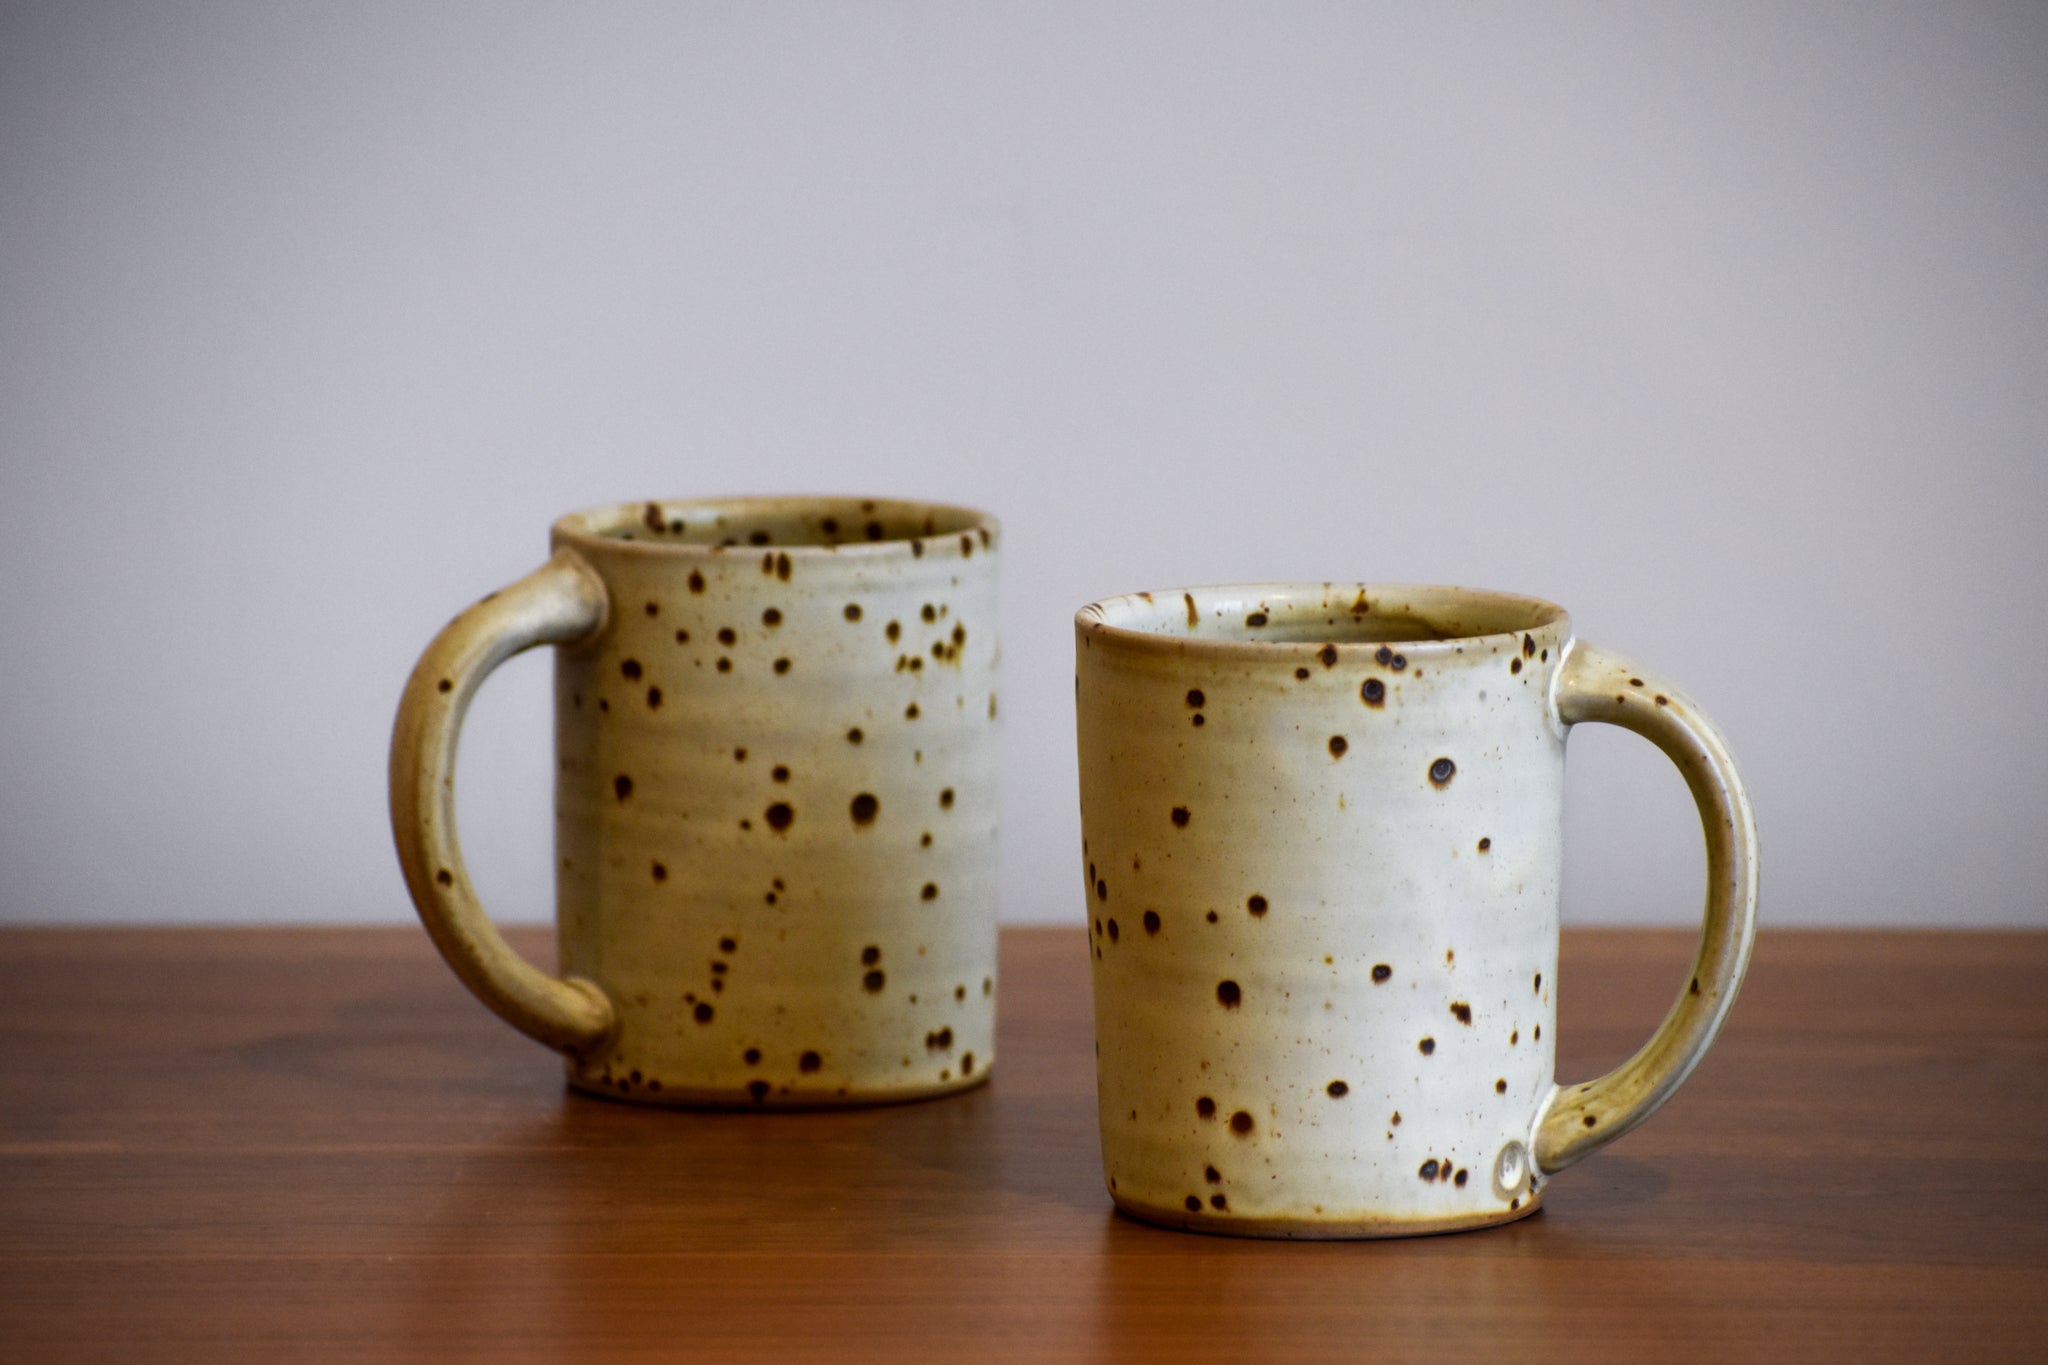 Two tall white ceramic mugs with dark spots